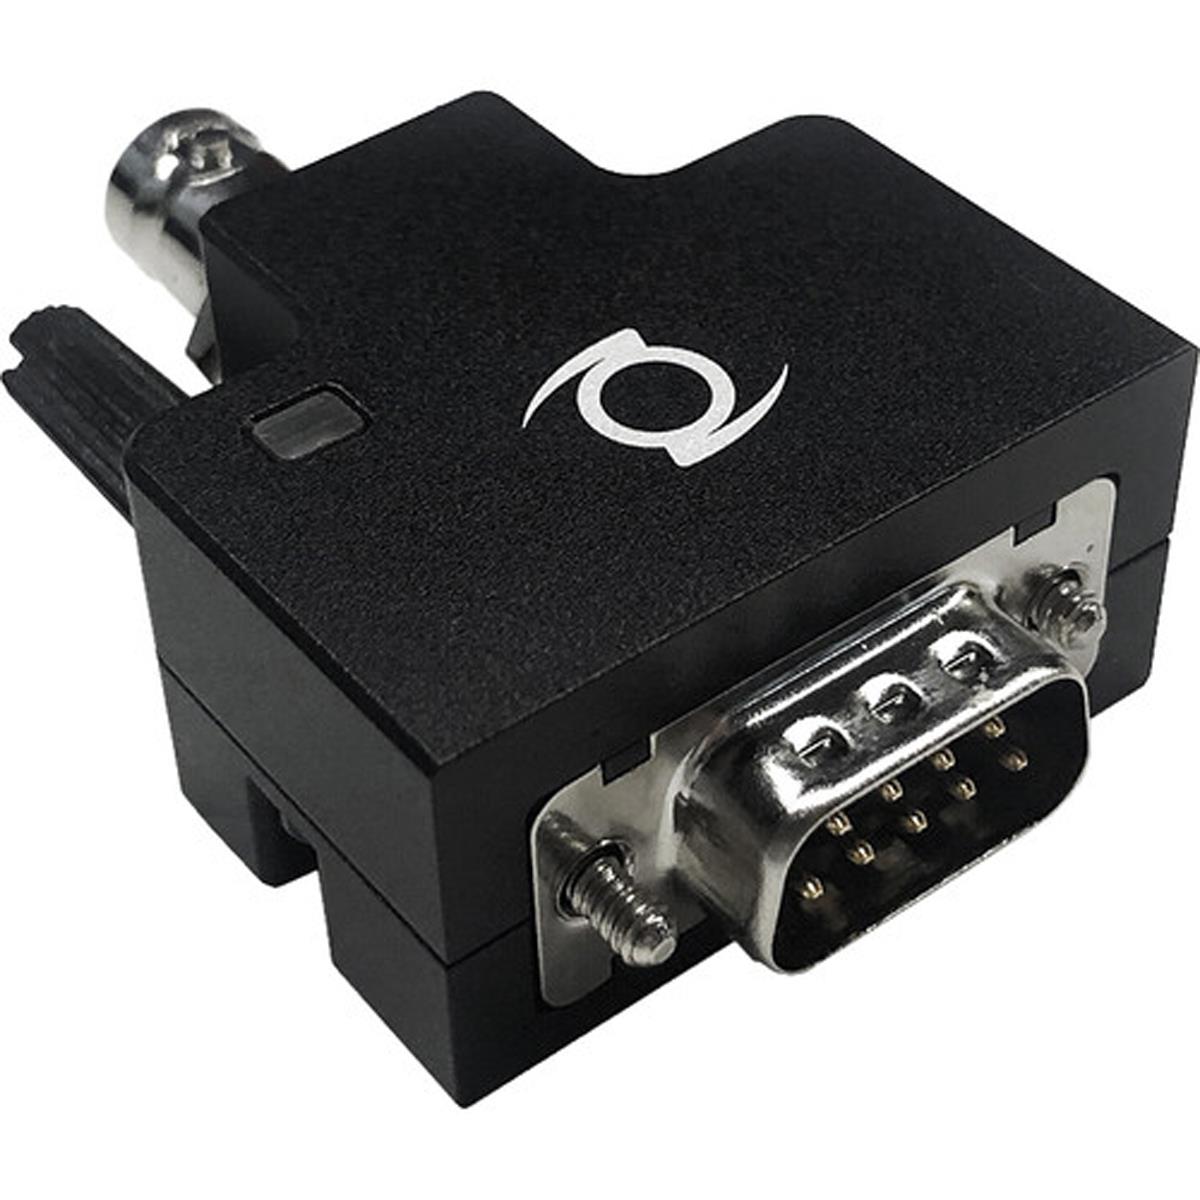 Image of Z CAM Timecode Adapter for Z CAM E2